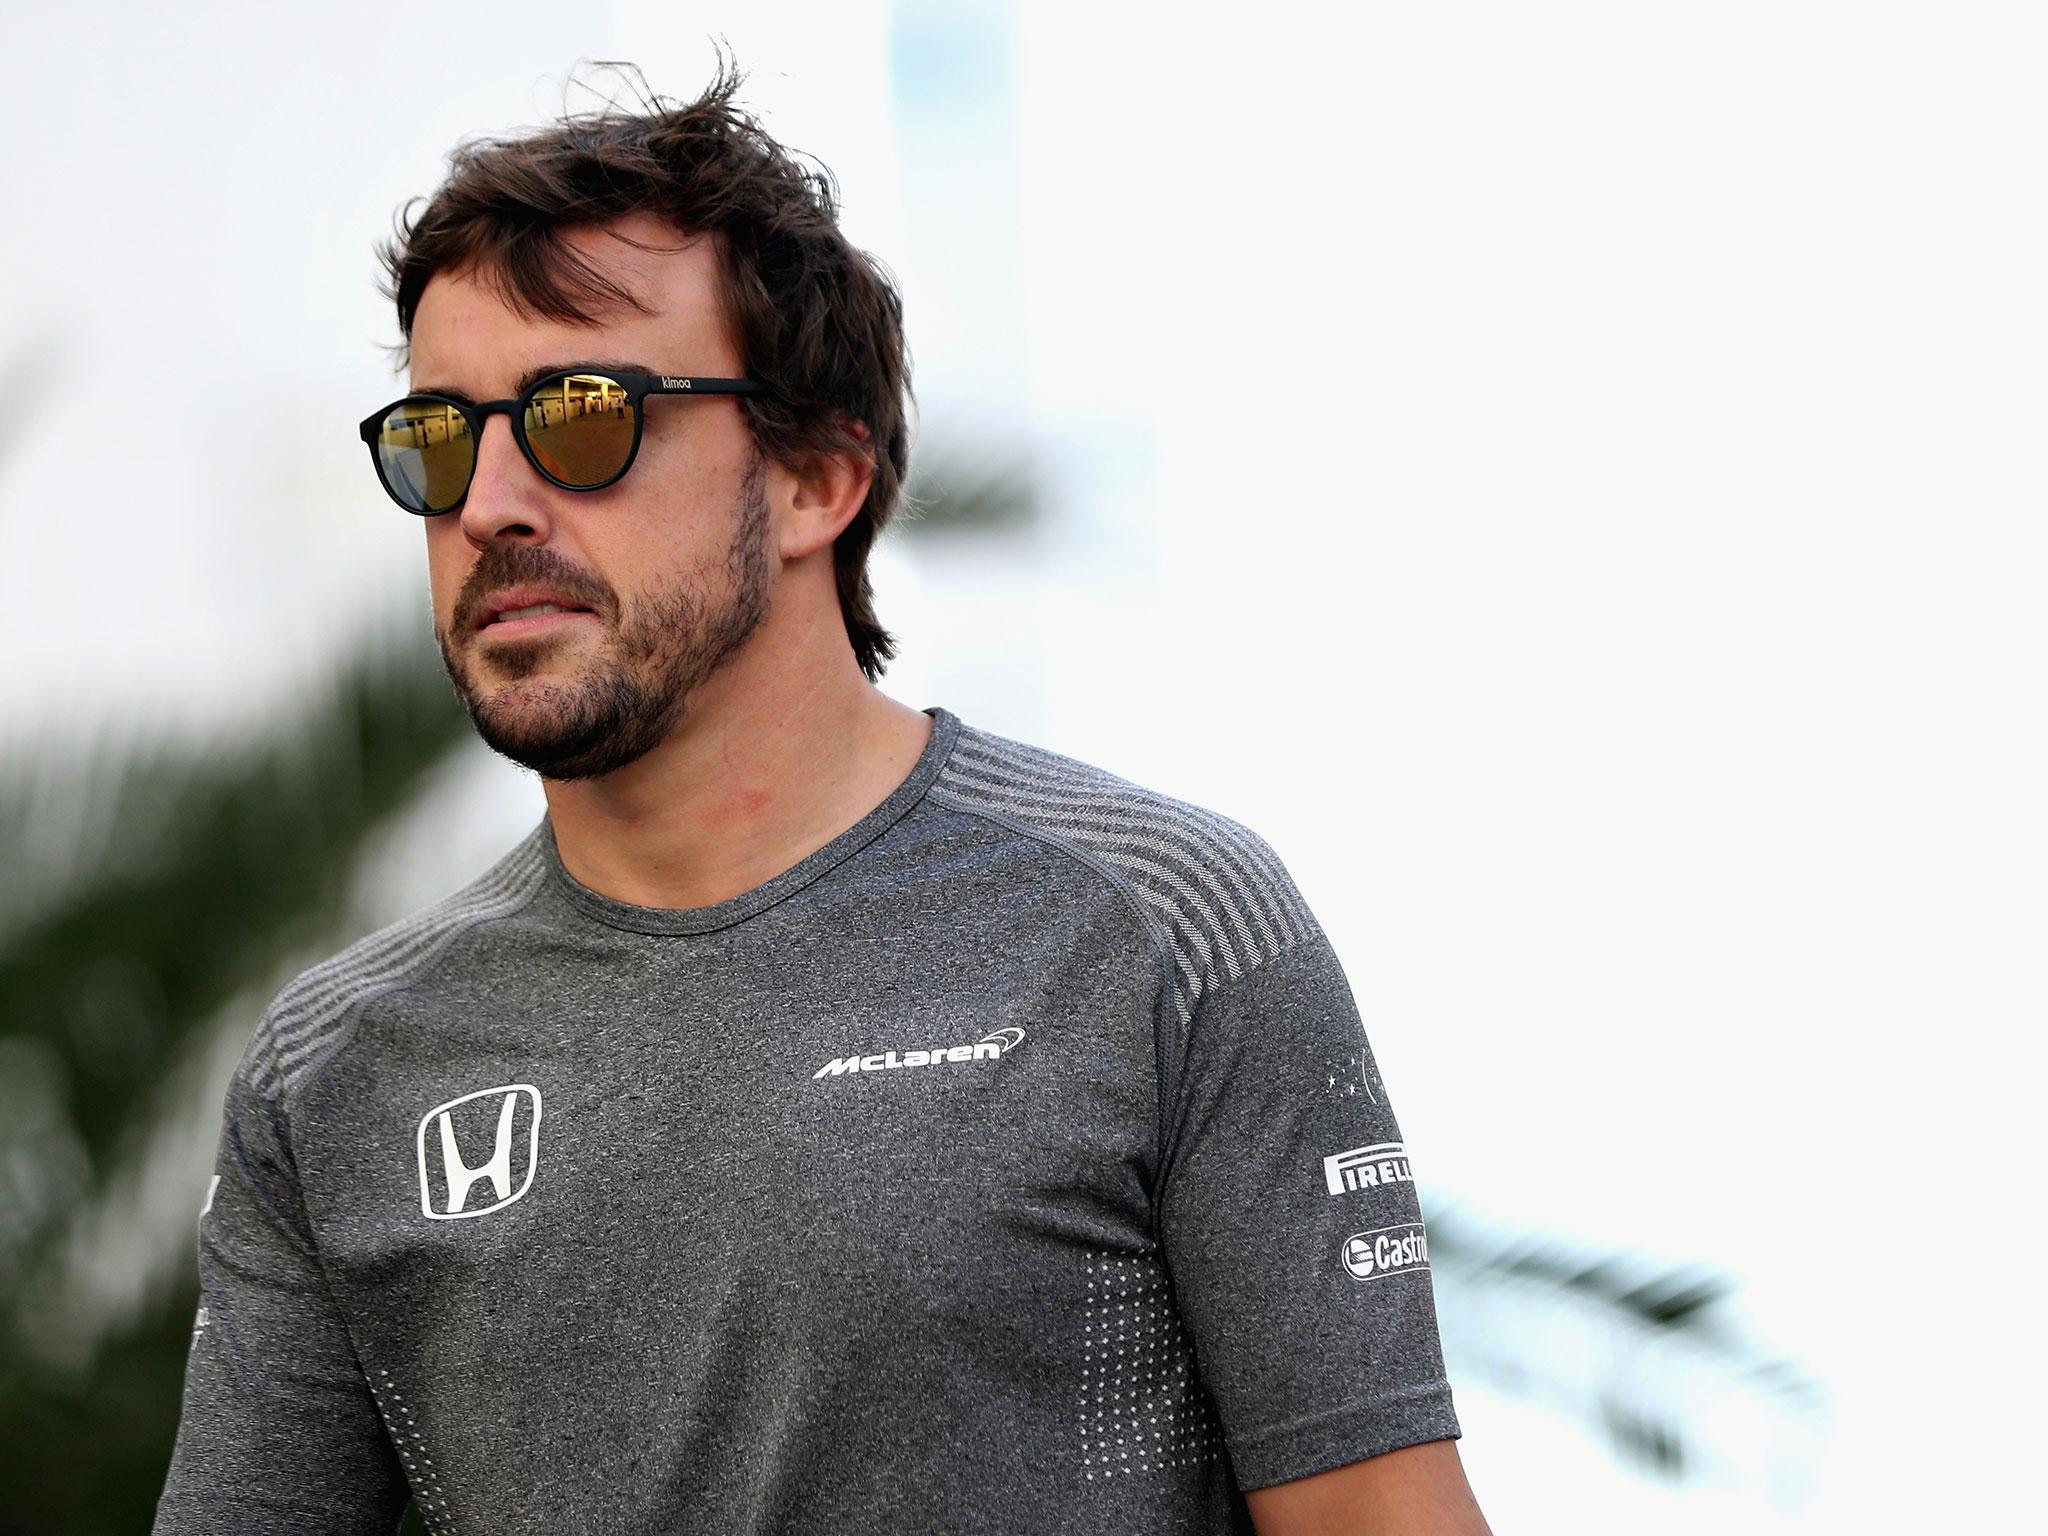 Fernando Alonso's frustrations are pushing him closer to the McLaren exit